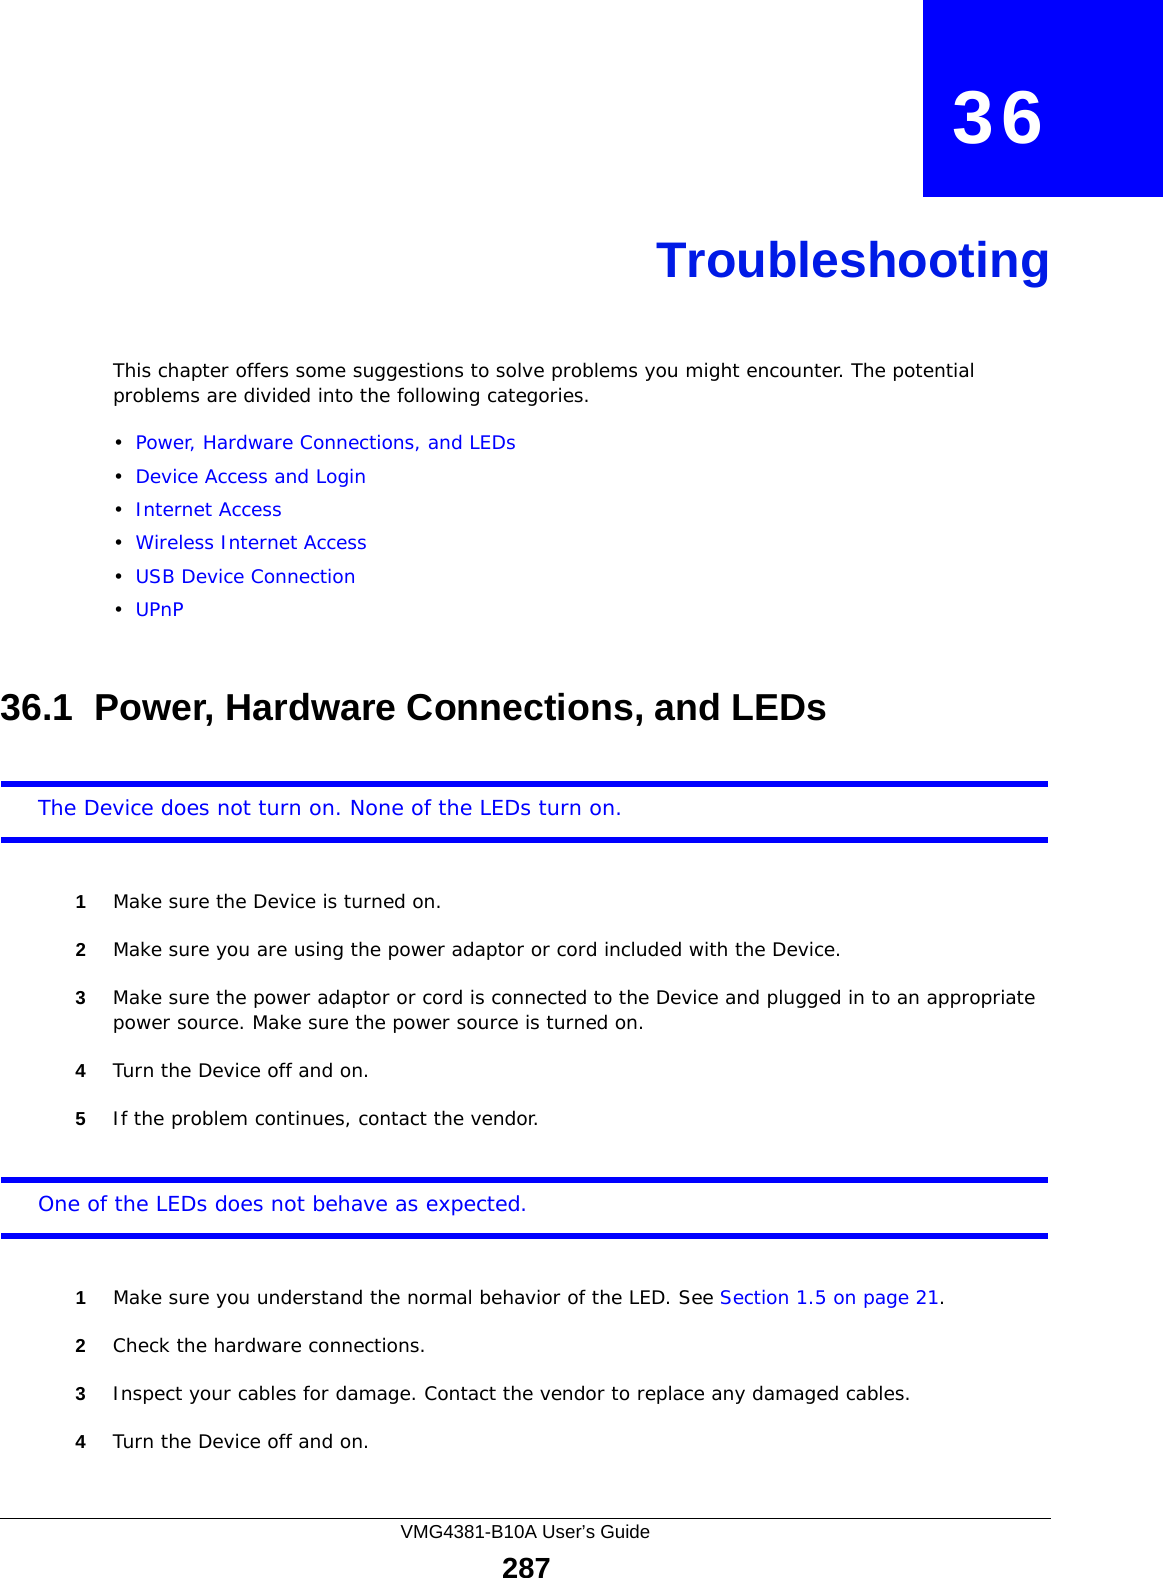 VMG4381-B10A User’s Guide287CHAPTER   36TroubleshootingThis chapter offers some suggestions to solve problems you might encounter. The potential problems are divided into the following categories. •Power, Hardware Connections, and LEDs•Device Access and Login•Internet Access•Wireless Internet Access•USB Device Connection•UPnP36.1  Power, Hardware Connections, and LEDsThe Device does not turn on. None of the LEDs turn on.1Make sure the Device is turned on. 2Make sure you are using the power adaptor or cord included with the Device.3Make sure the power adaptor or cord is connected to the Device and plugged in to an appropriate power source. Make sure the power source is turned on.4Turn the Device off and on.5If the problem continues, contact the vendor.One of the LEDs does not behave as expected.1Make sure you understand the normal behavior of the LED. See Section 1.5 on page 21.2Check the hardware connections.3Inspect your cables for damage. Contact the vendor to replace any damaged cables.4Turn the Device off and on.